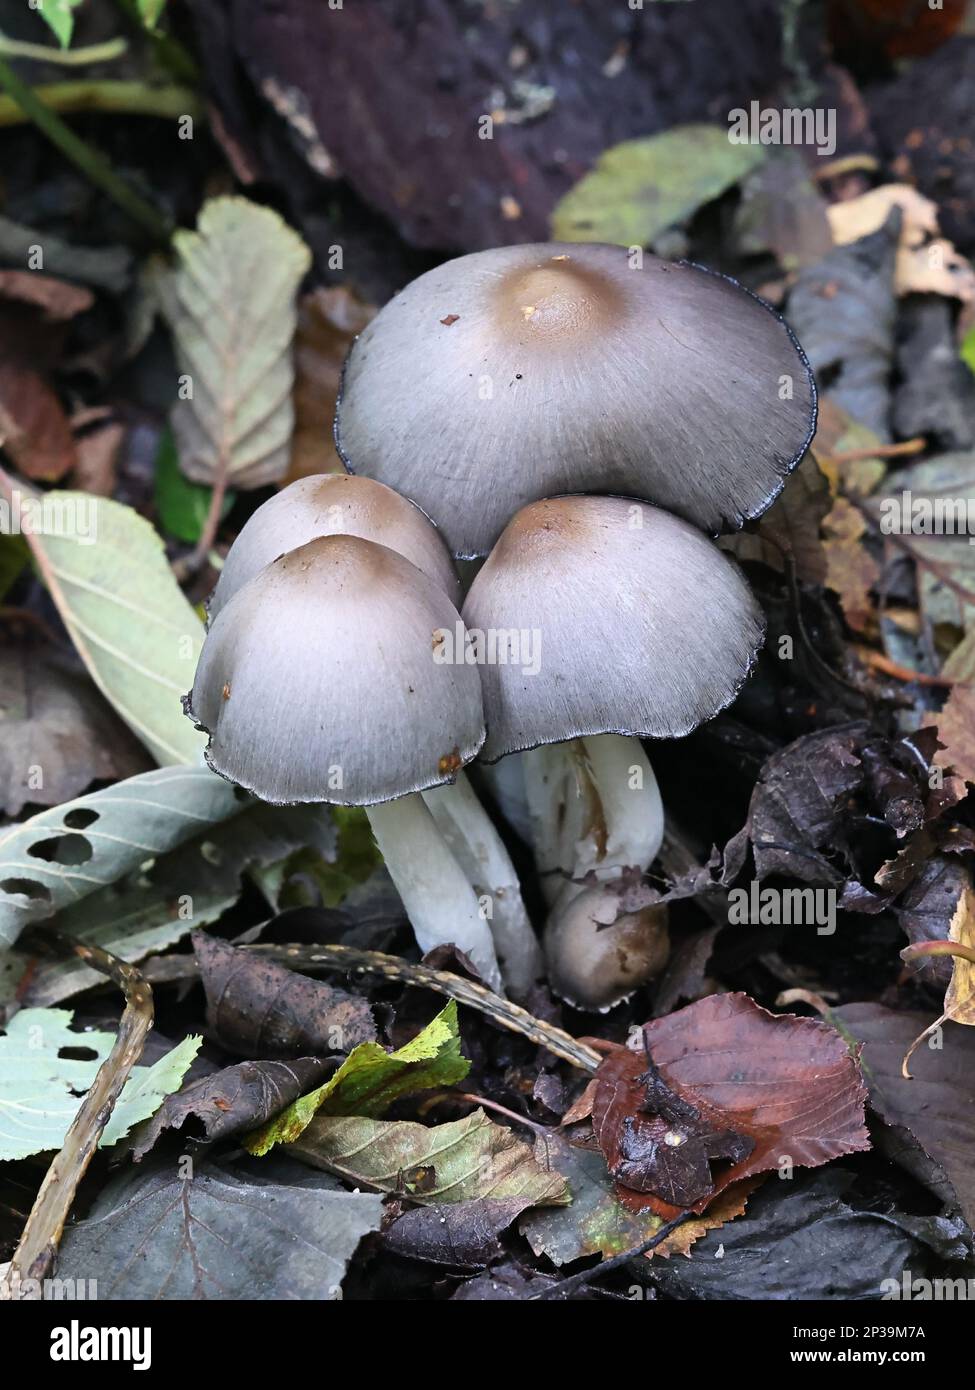 Coprinopsis acuminata, also called Coprinus acuminatus, commonly known as the humpback inkcap, wild mushroom from Finland Stock Photo